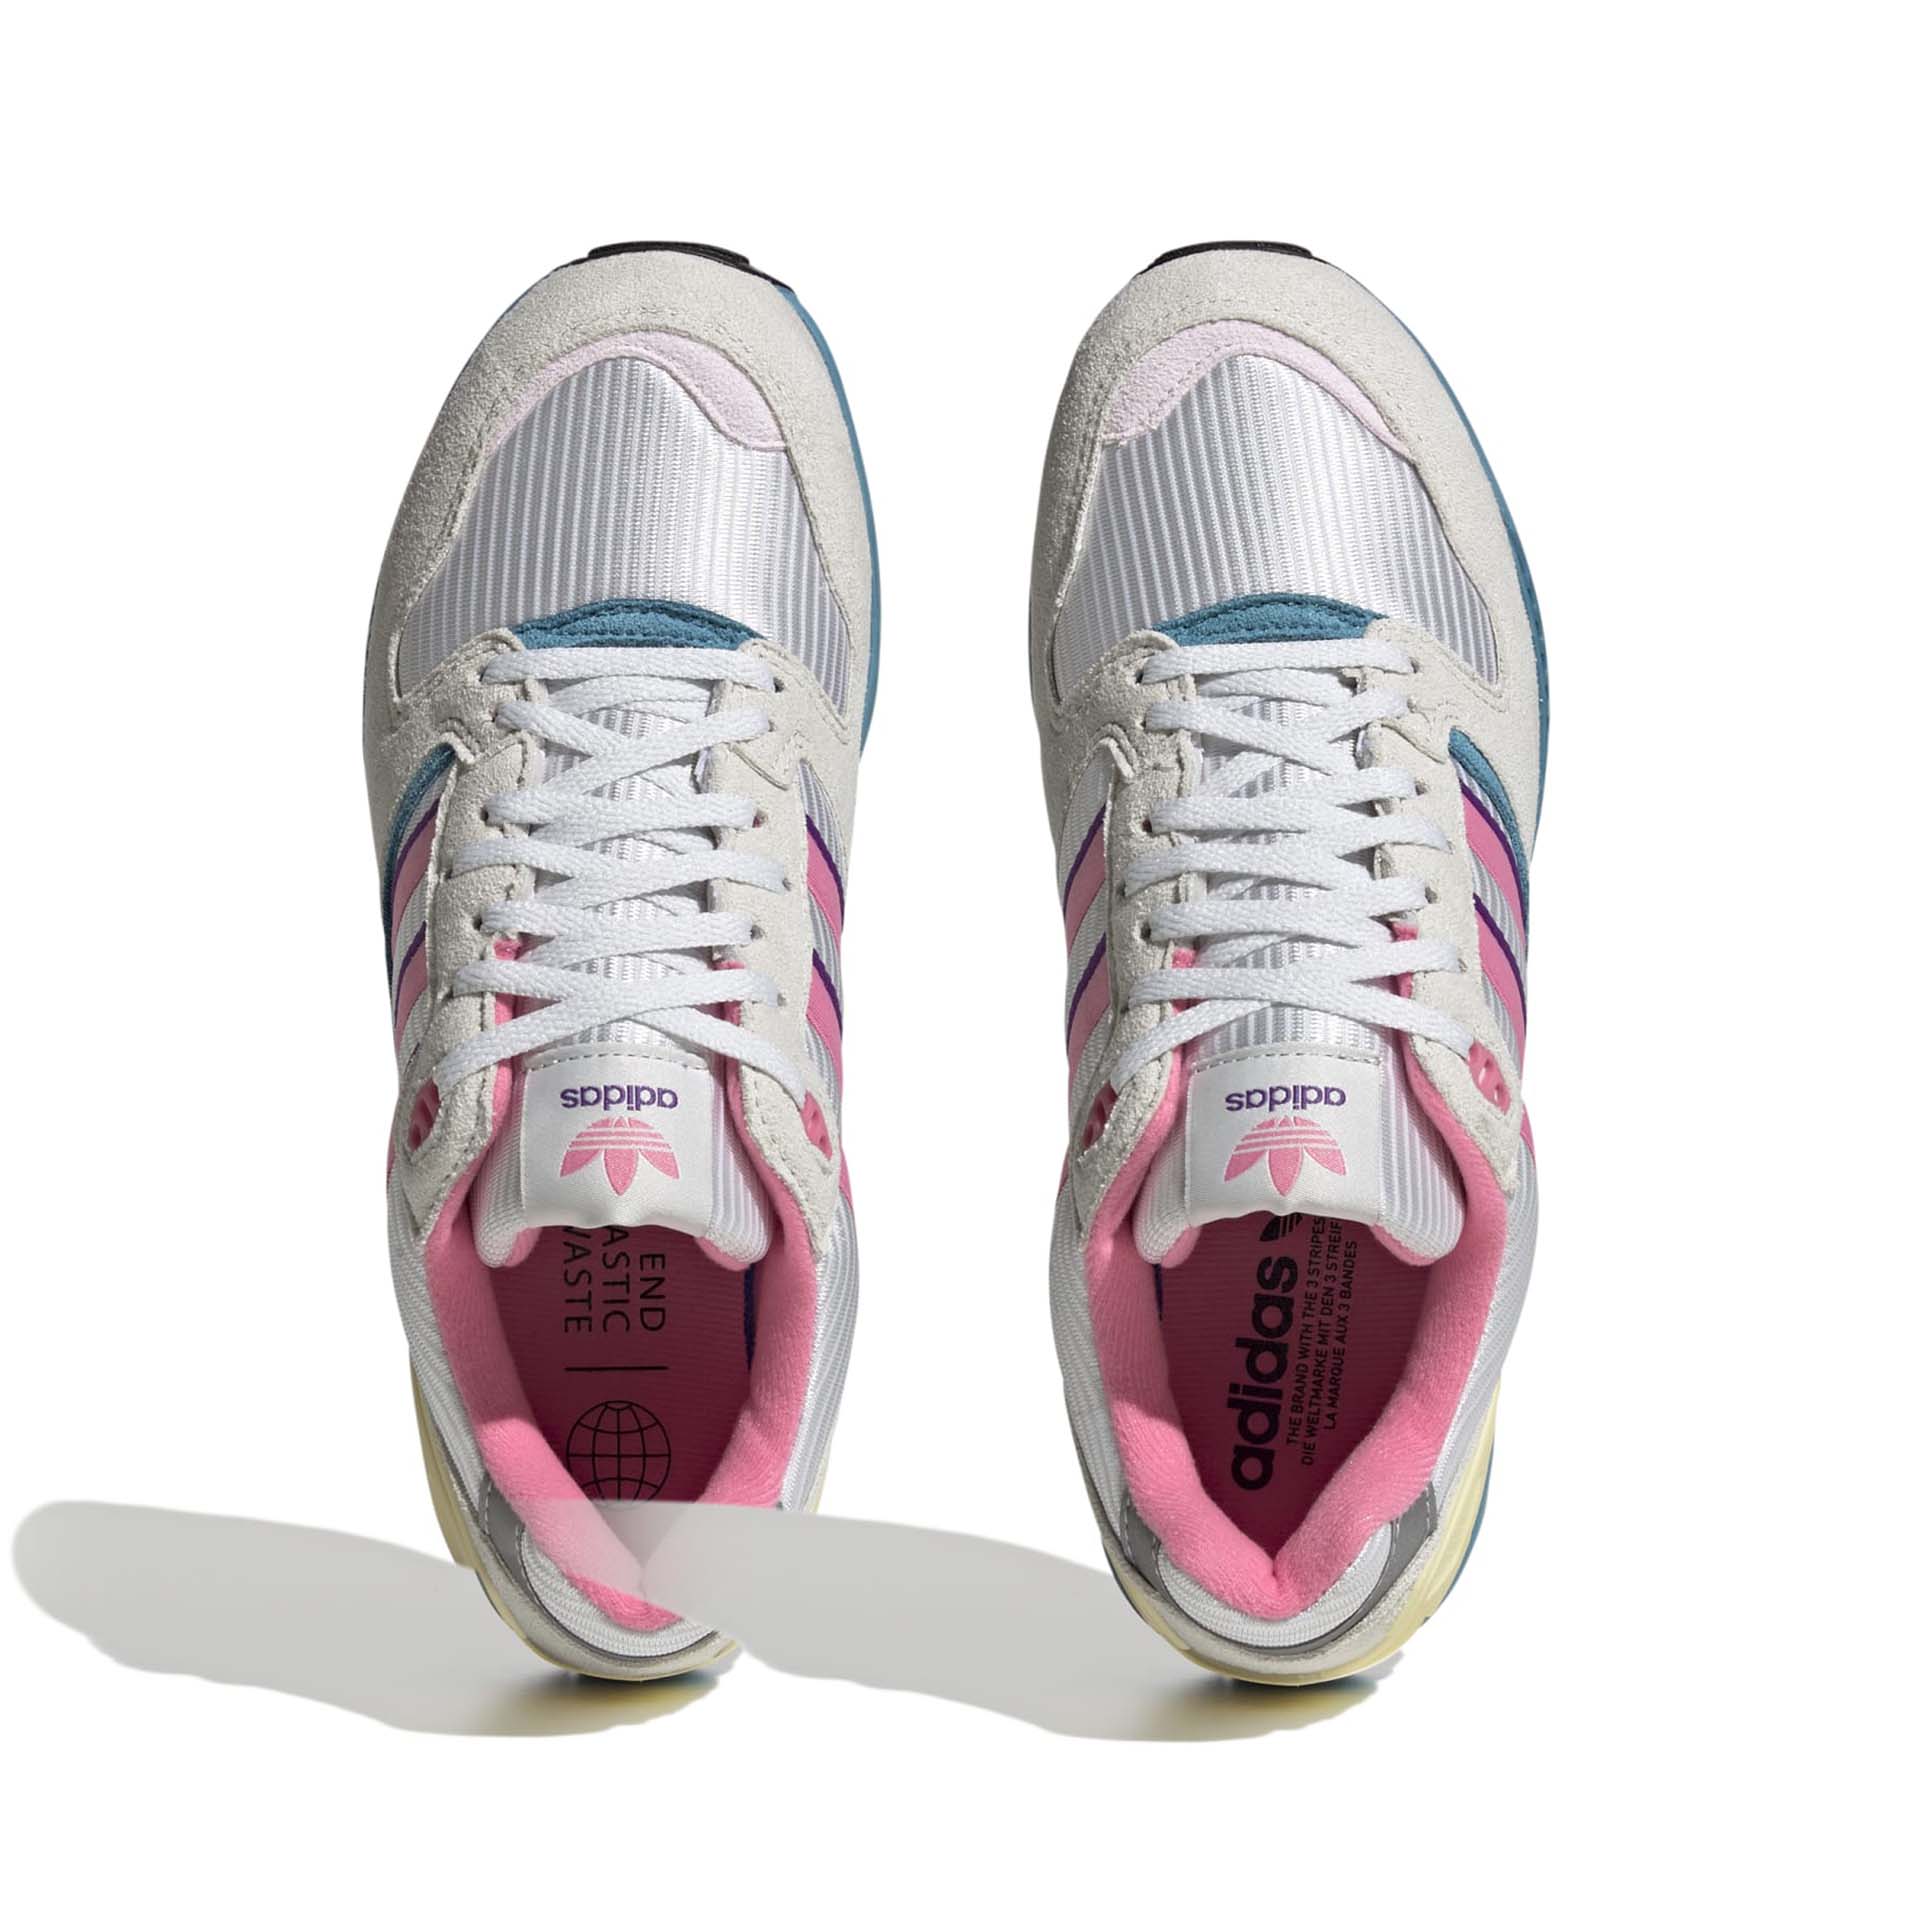 adidas ZX 5020 Sneaker Crystal White / Bliss Pink / Silver Metallic